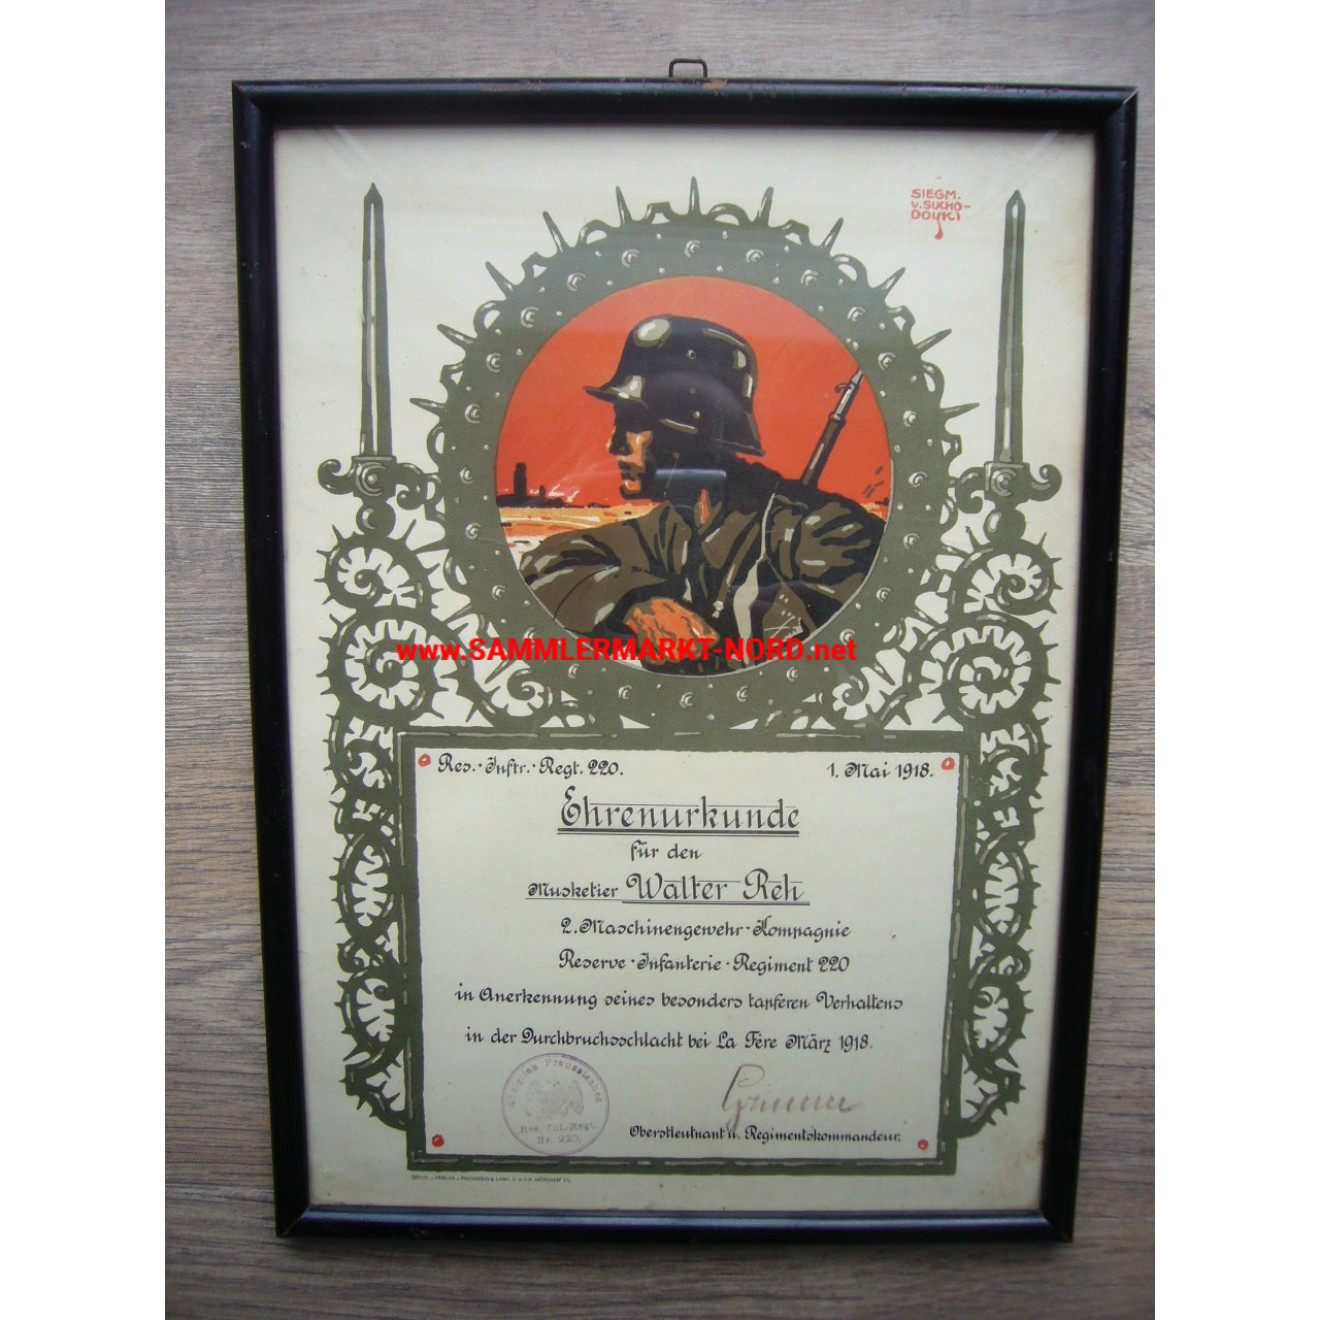 Reserve Infantry Regiment 220 - Certificate of Honour for Particularly Brave Conduct